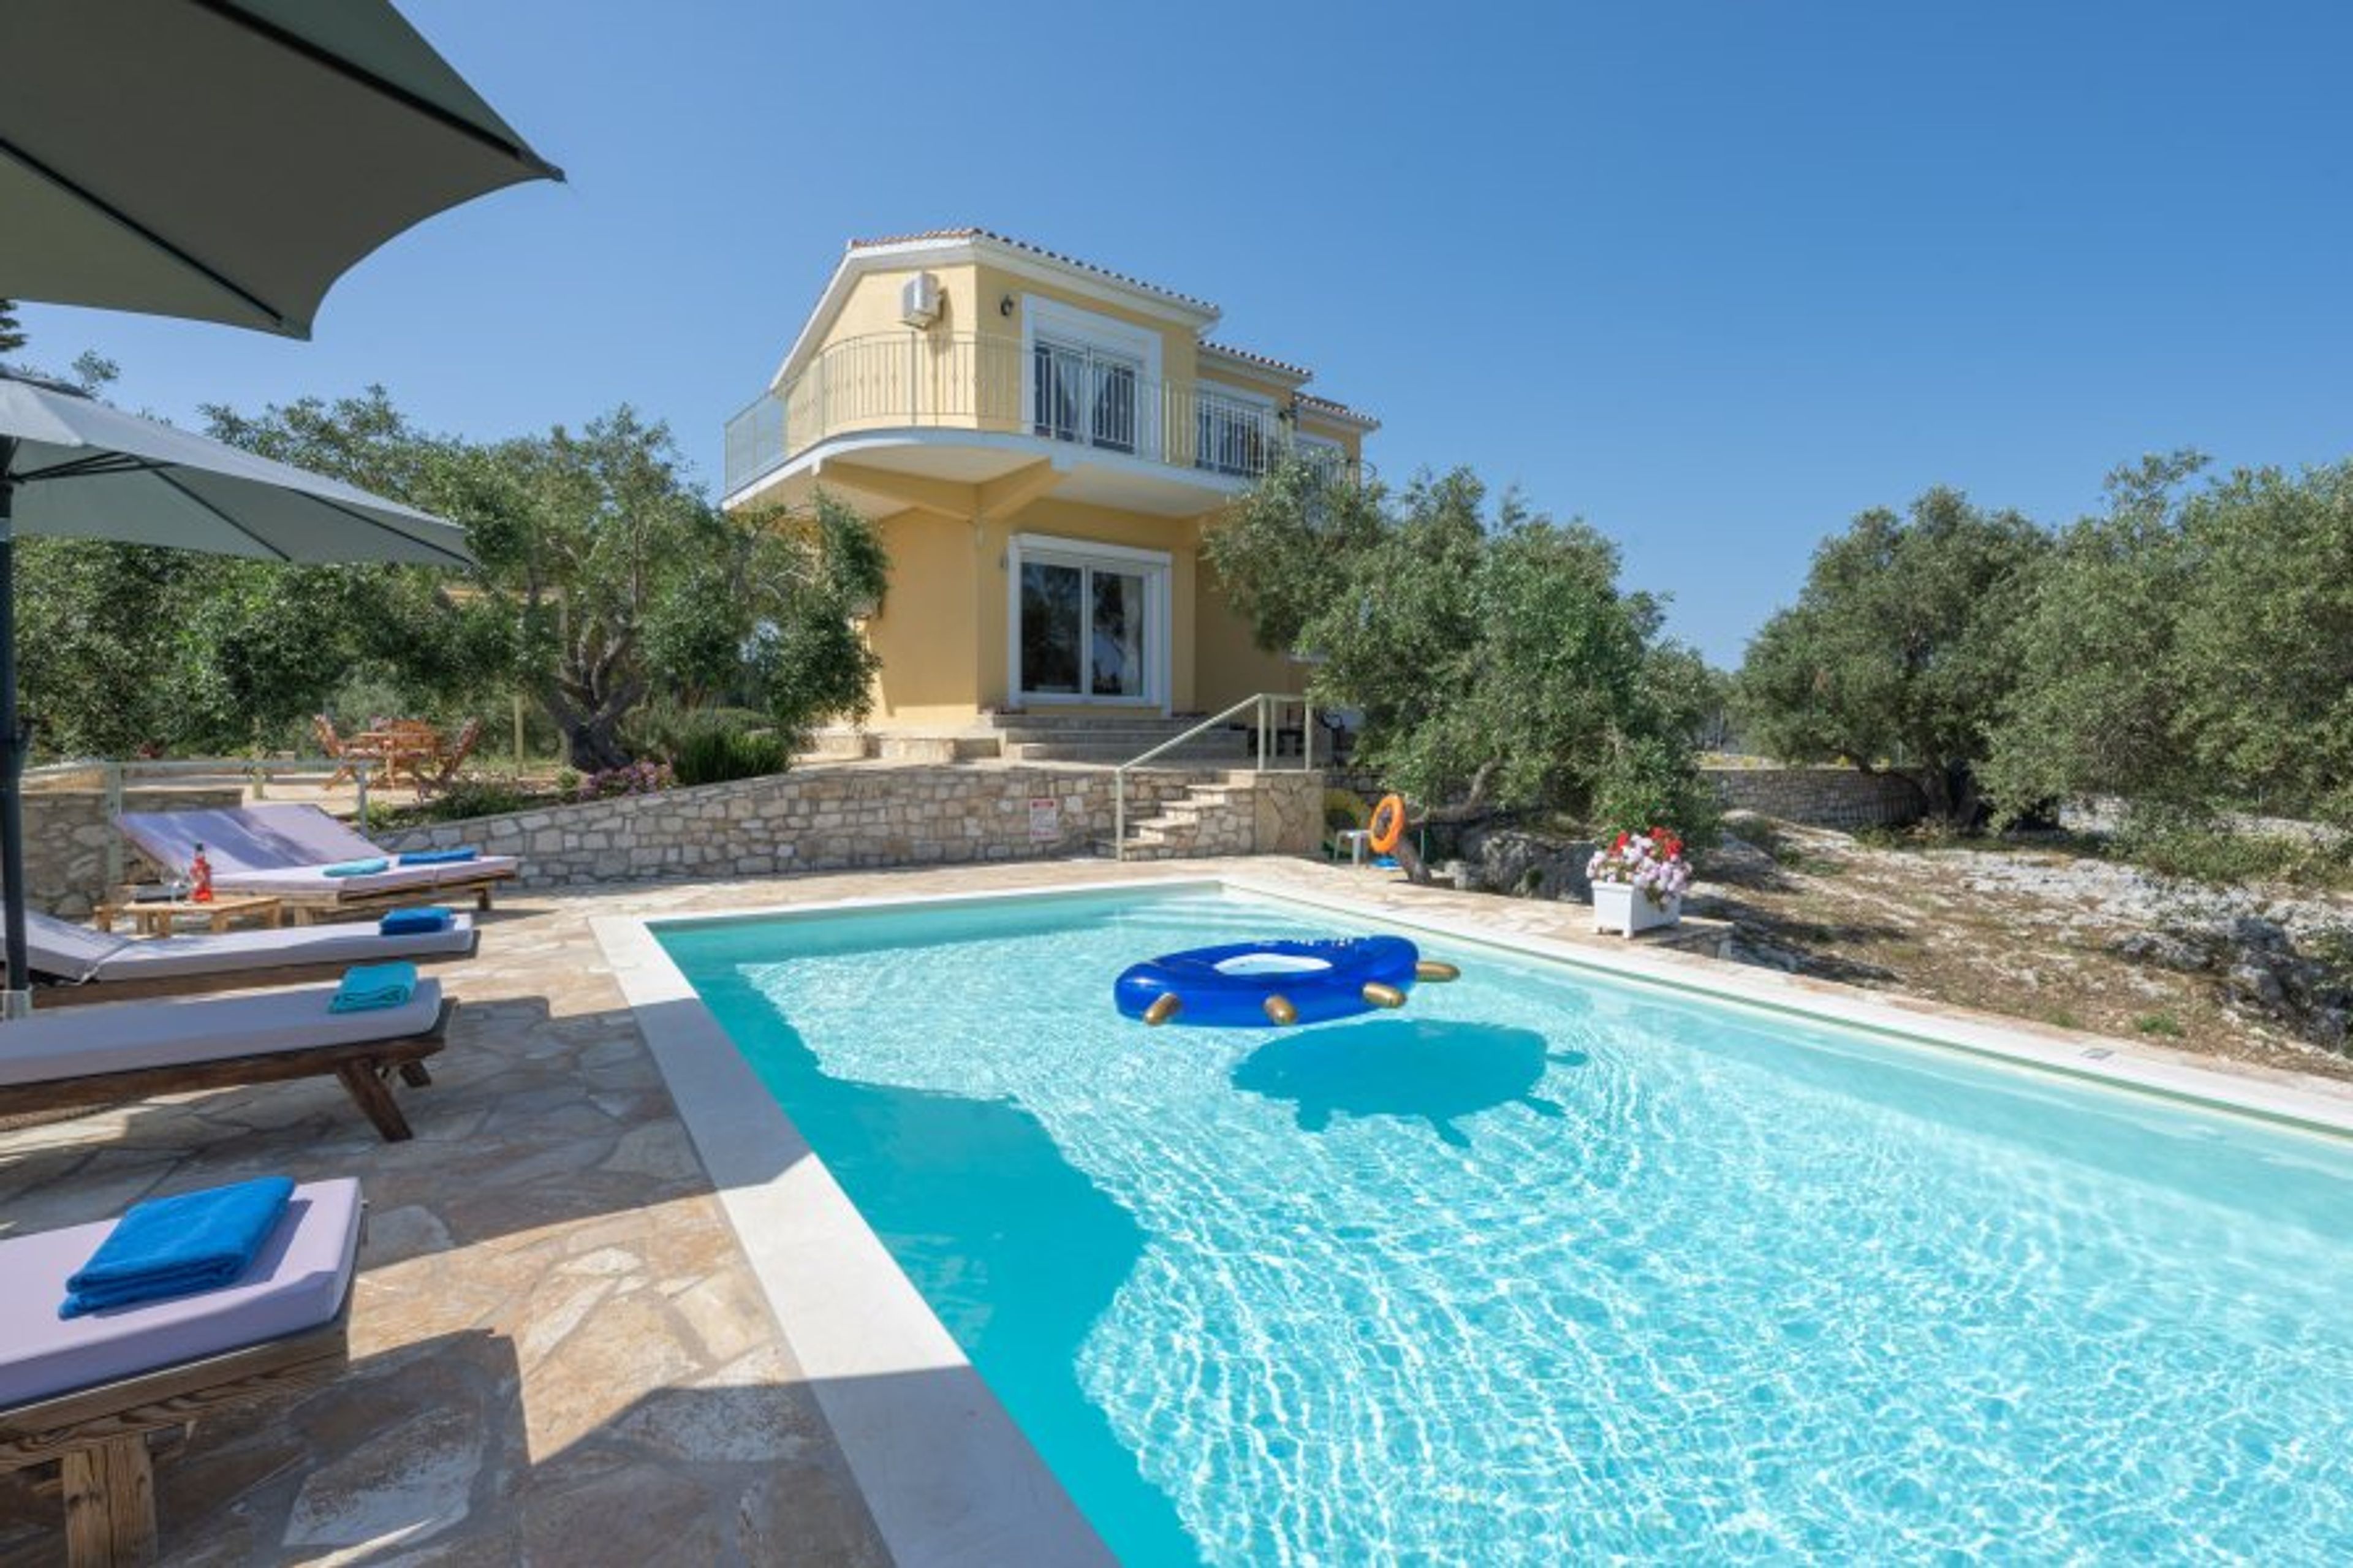 Our pool and villa